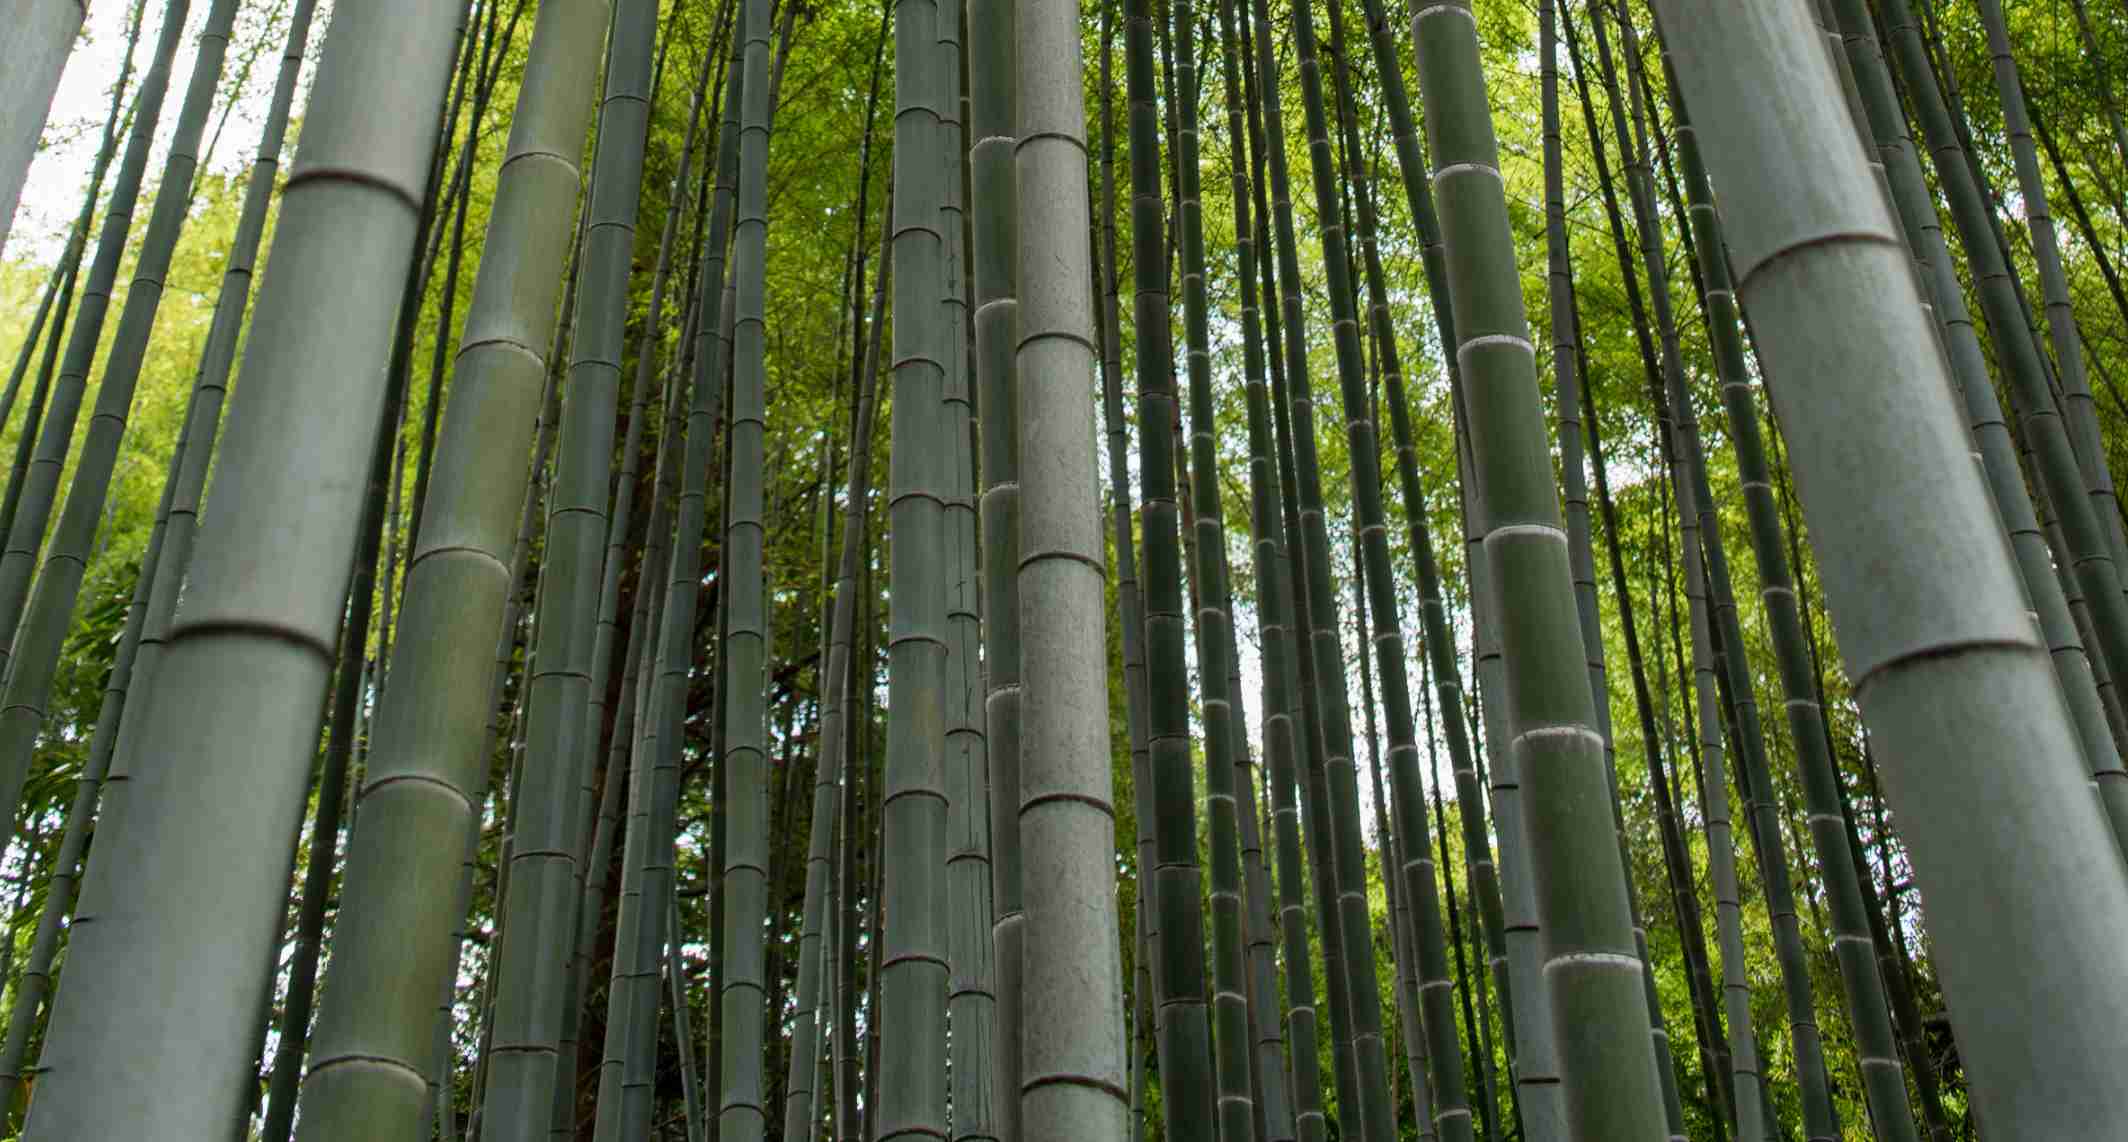 Giant bamboo for building and construction